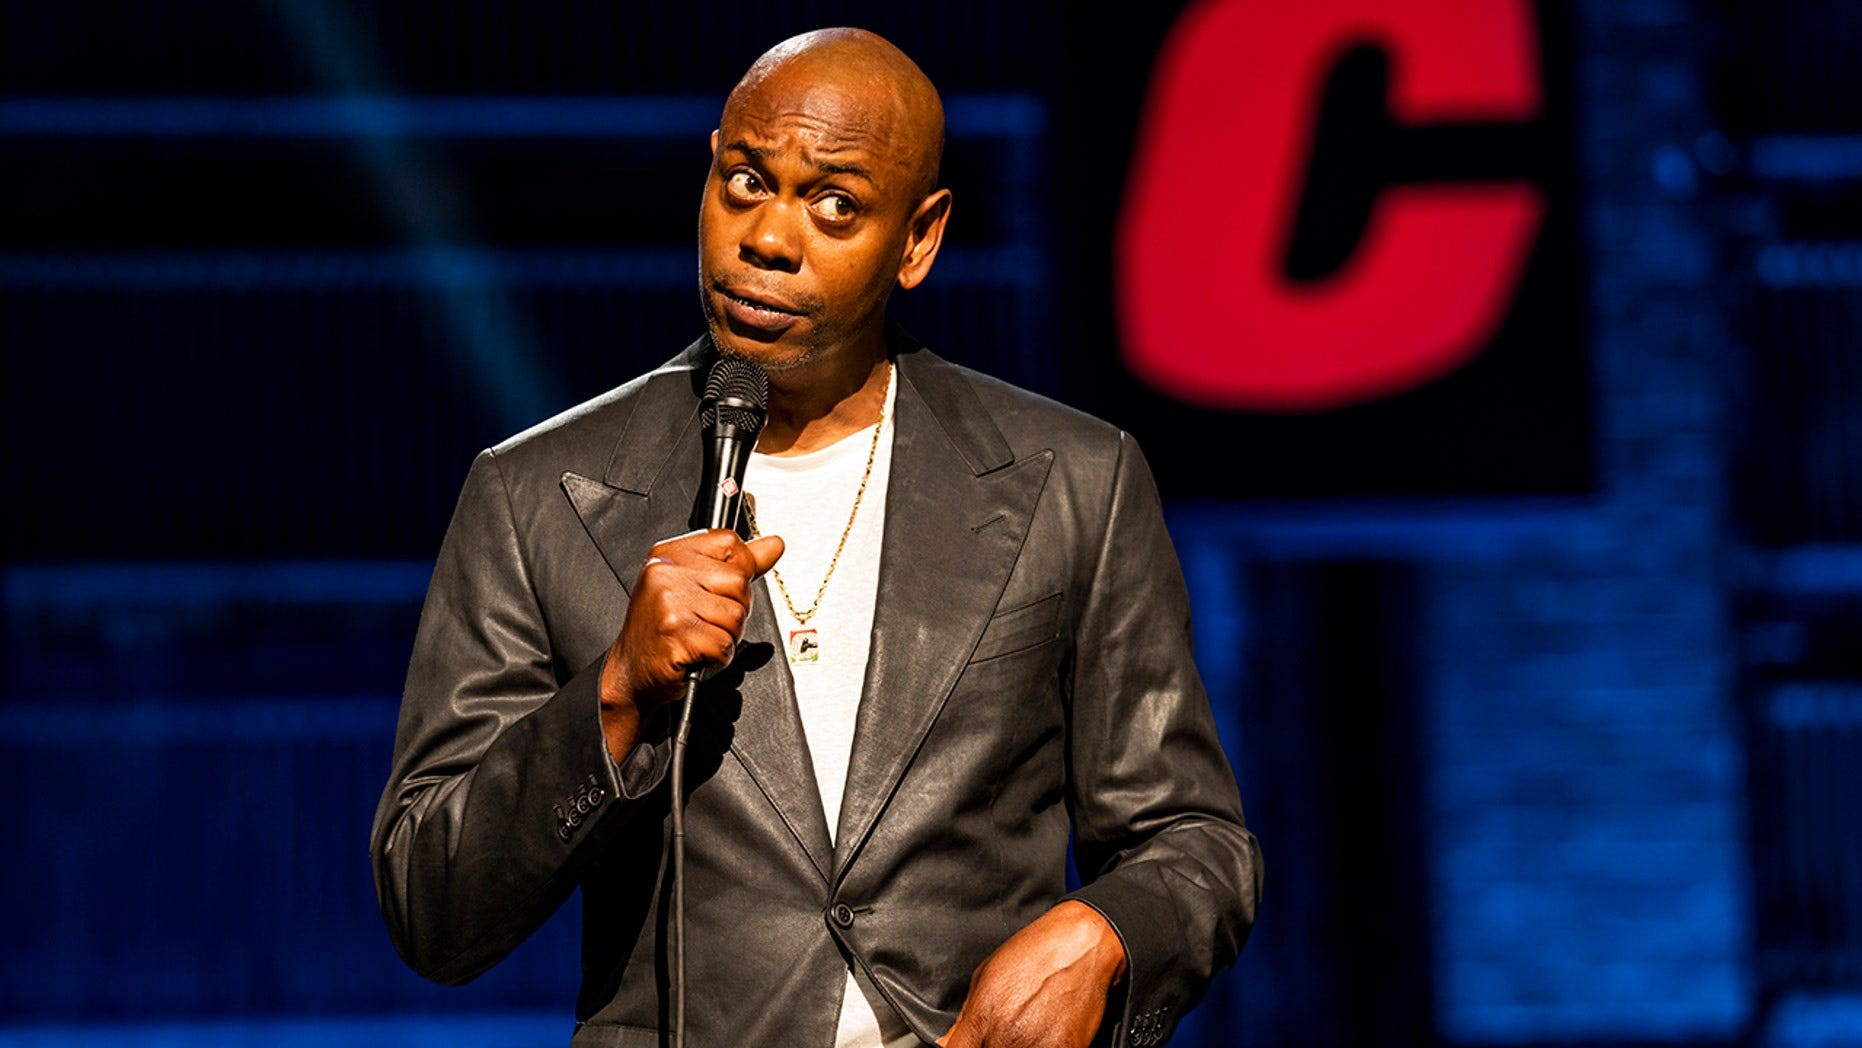 Netflix employee who was suspended after Dave Chappelle criticism is reinstated - Fox Business